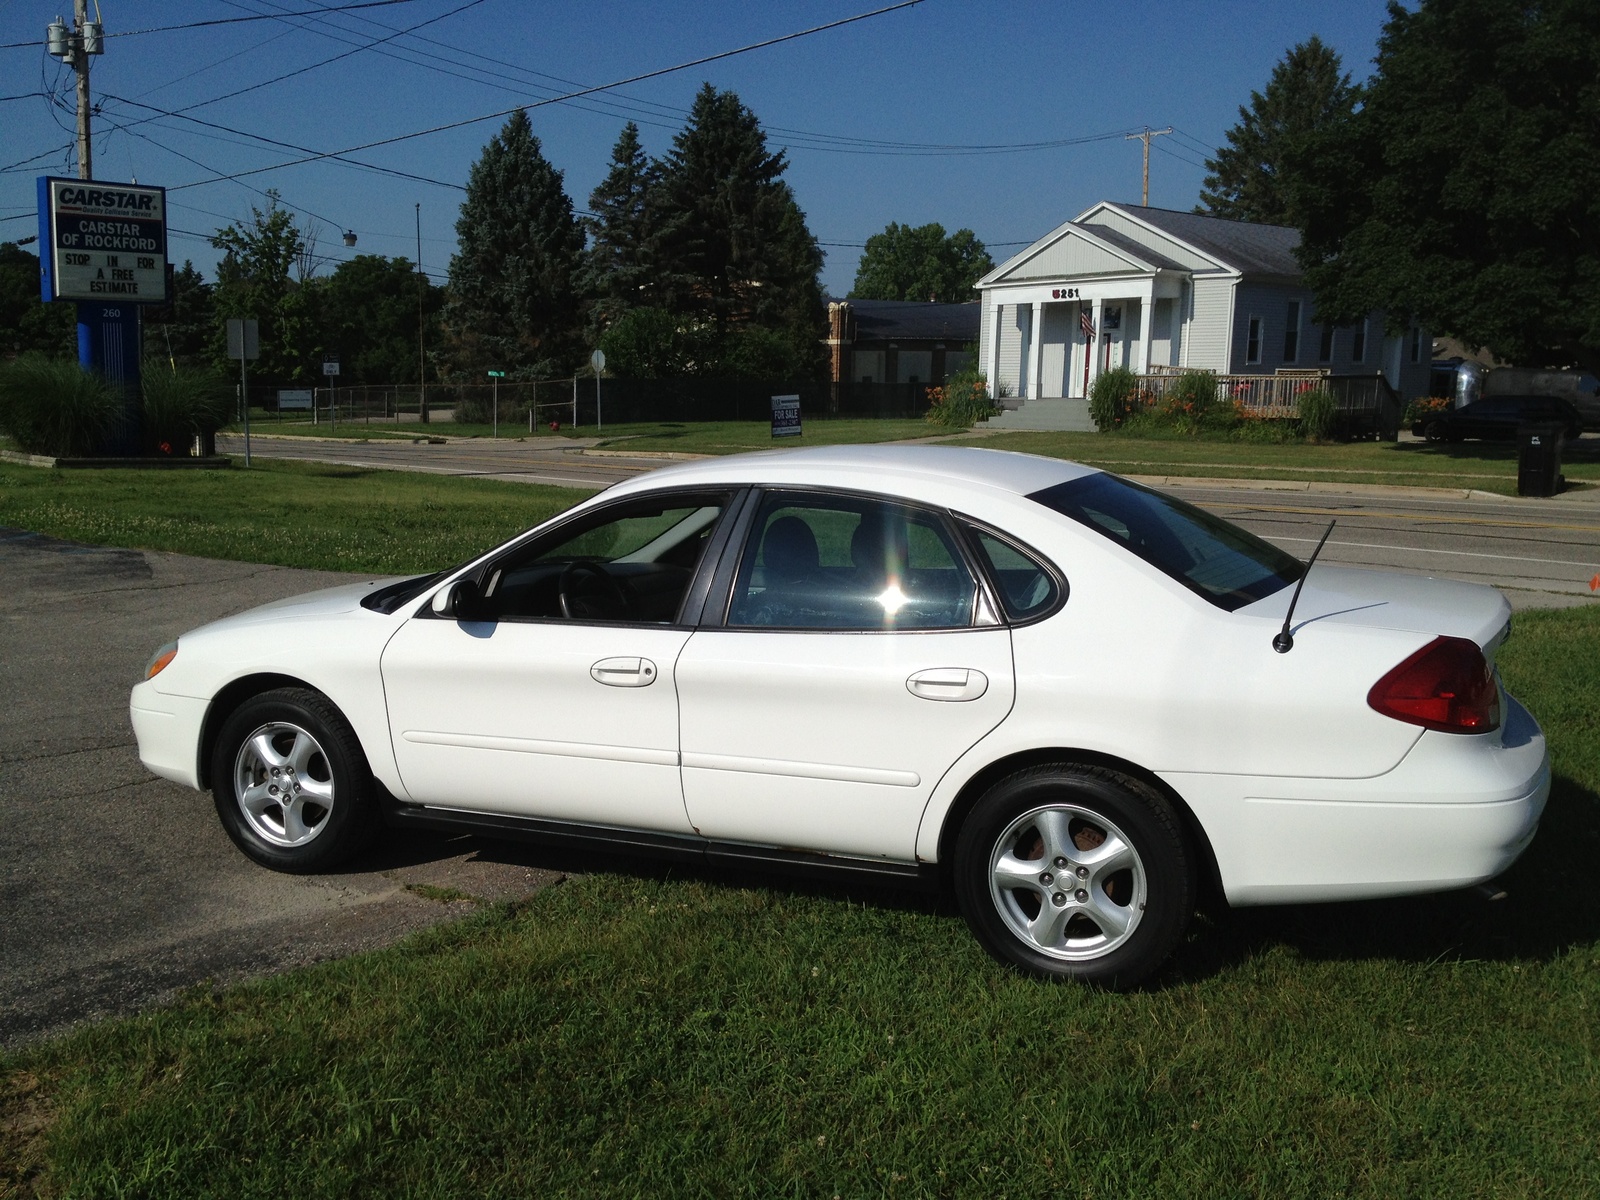 2002 Ford taurus used car review